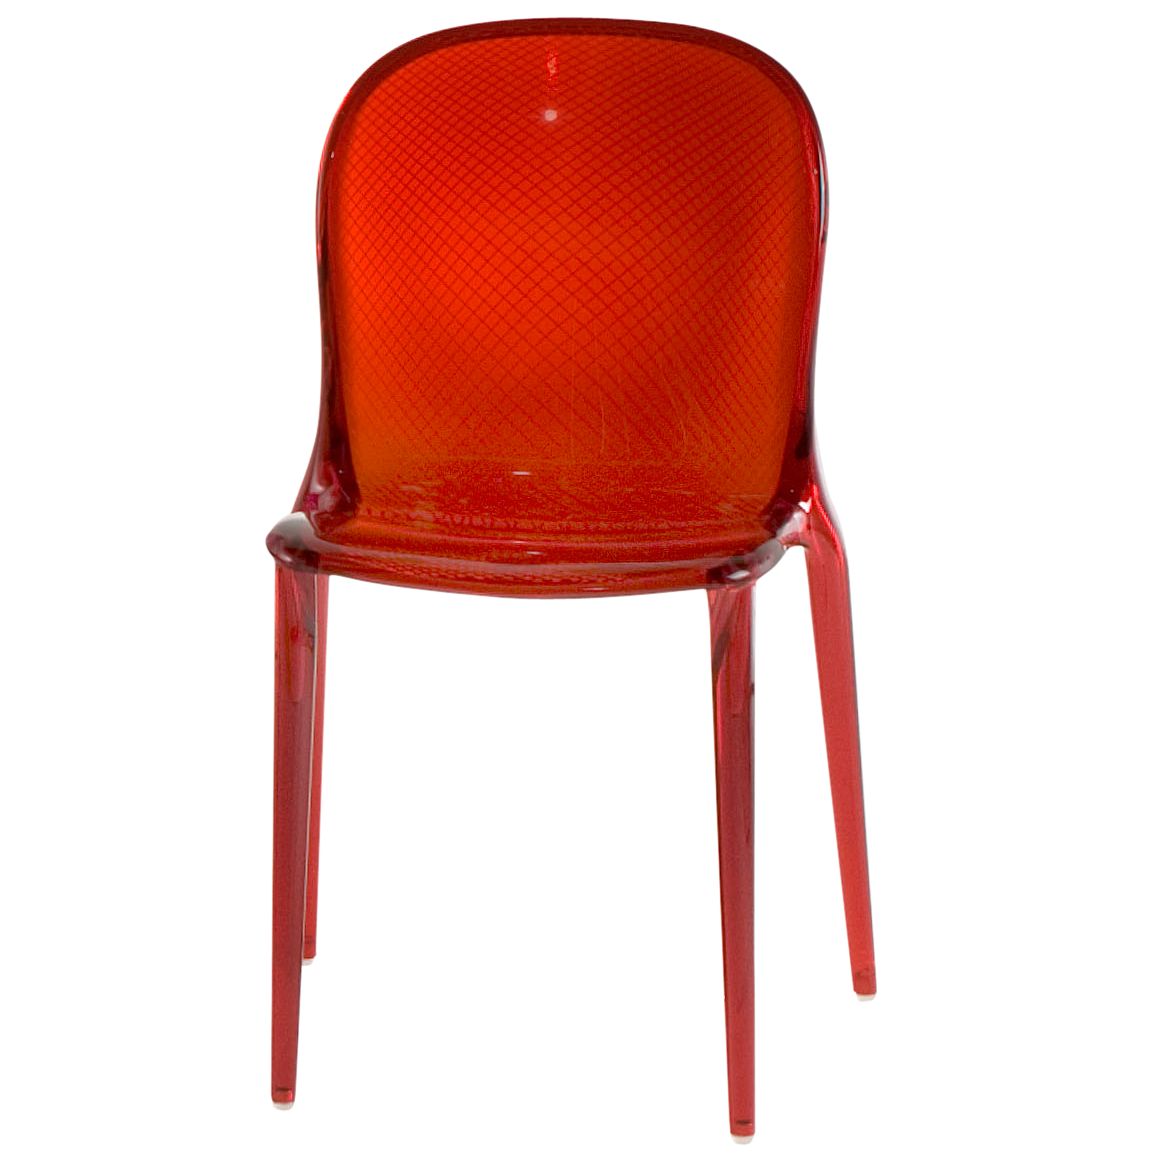 Patrick Jouin for Kartell Thalya Chair, Red, Pair at JohnLewis